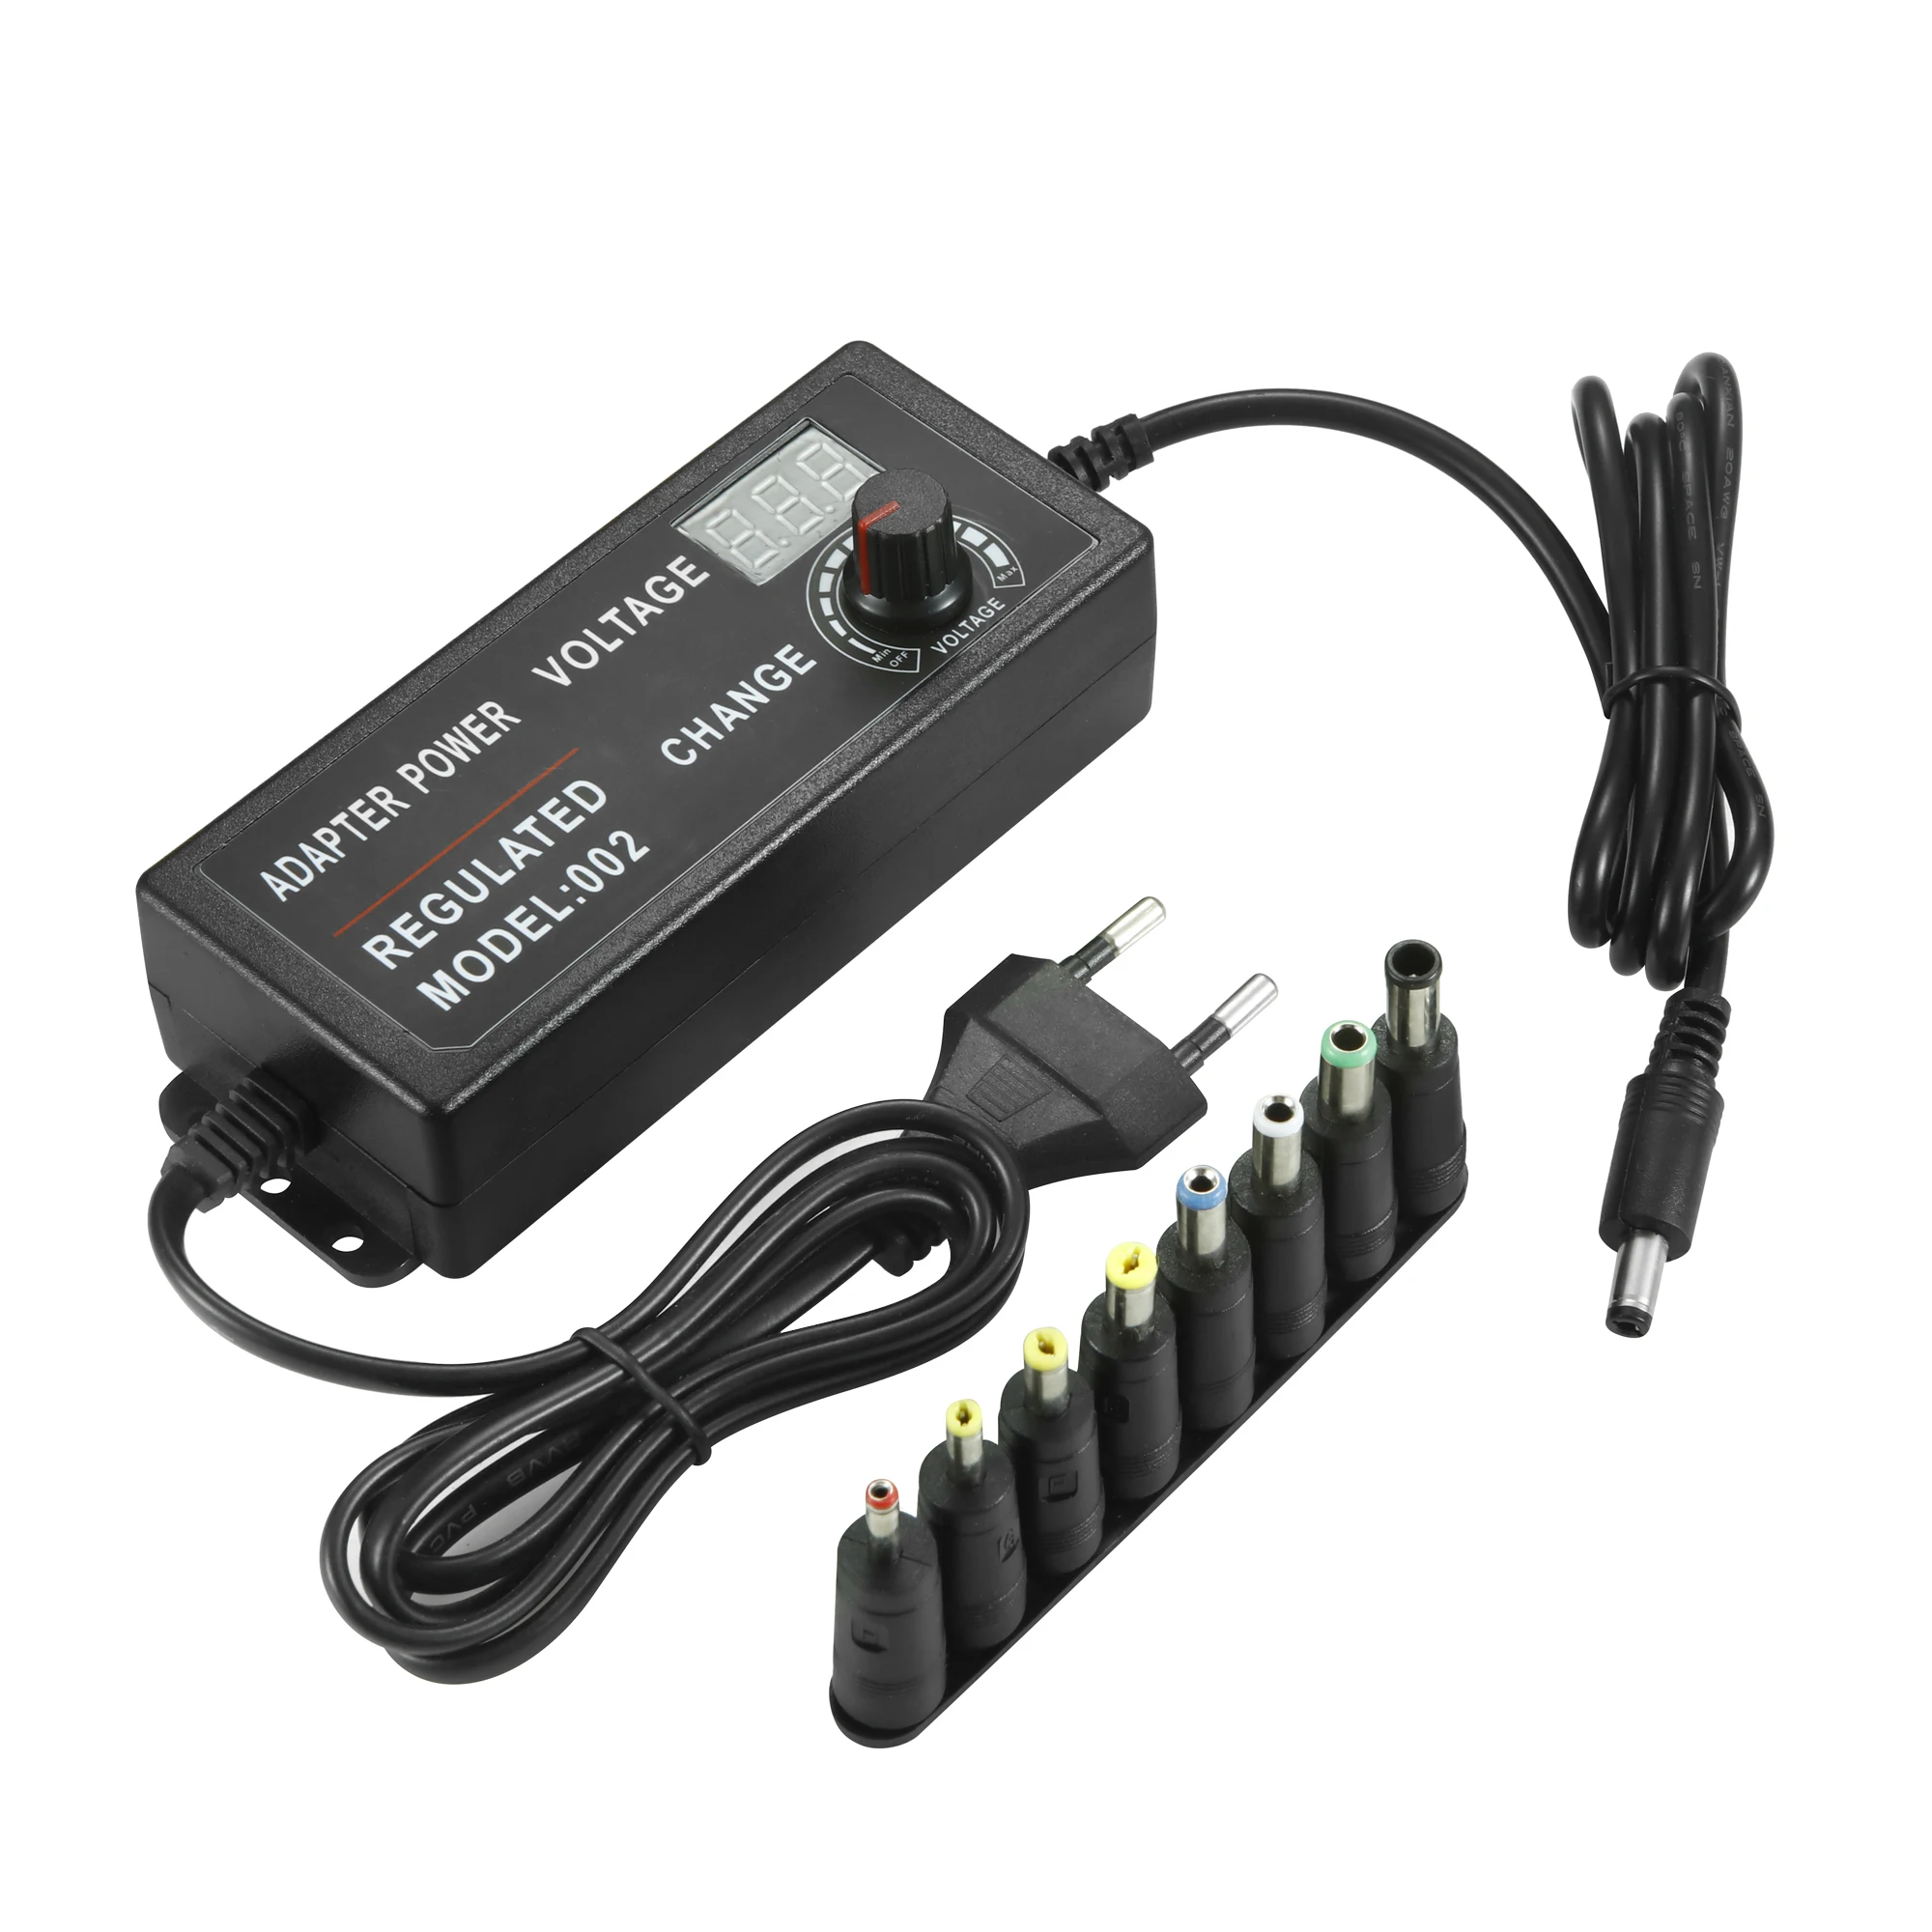 Universal Adjustable AC/DC Power Supply Adapter 3-24V 2A 48W LED Volt Display 6 